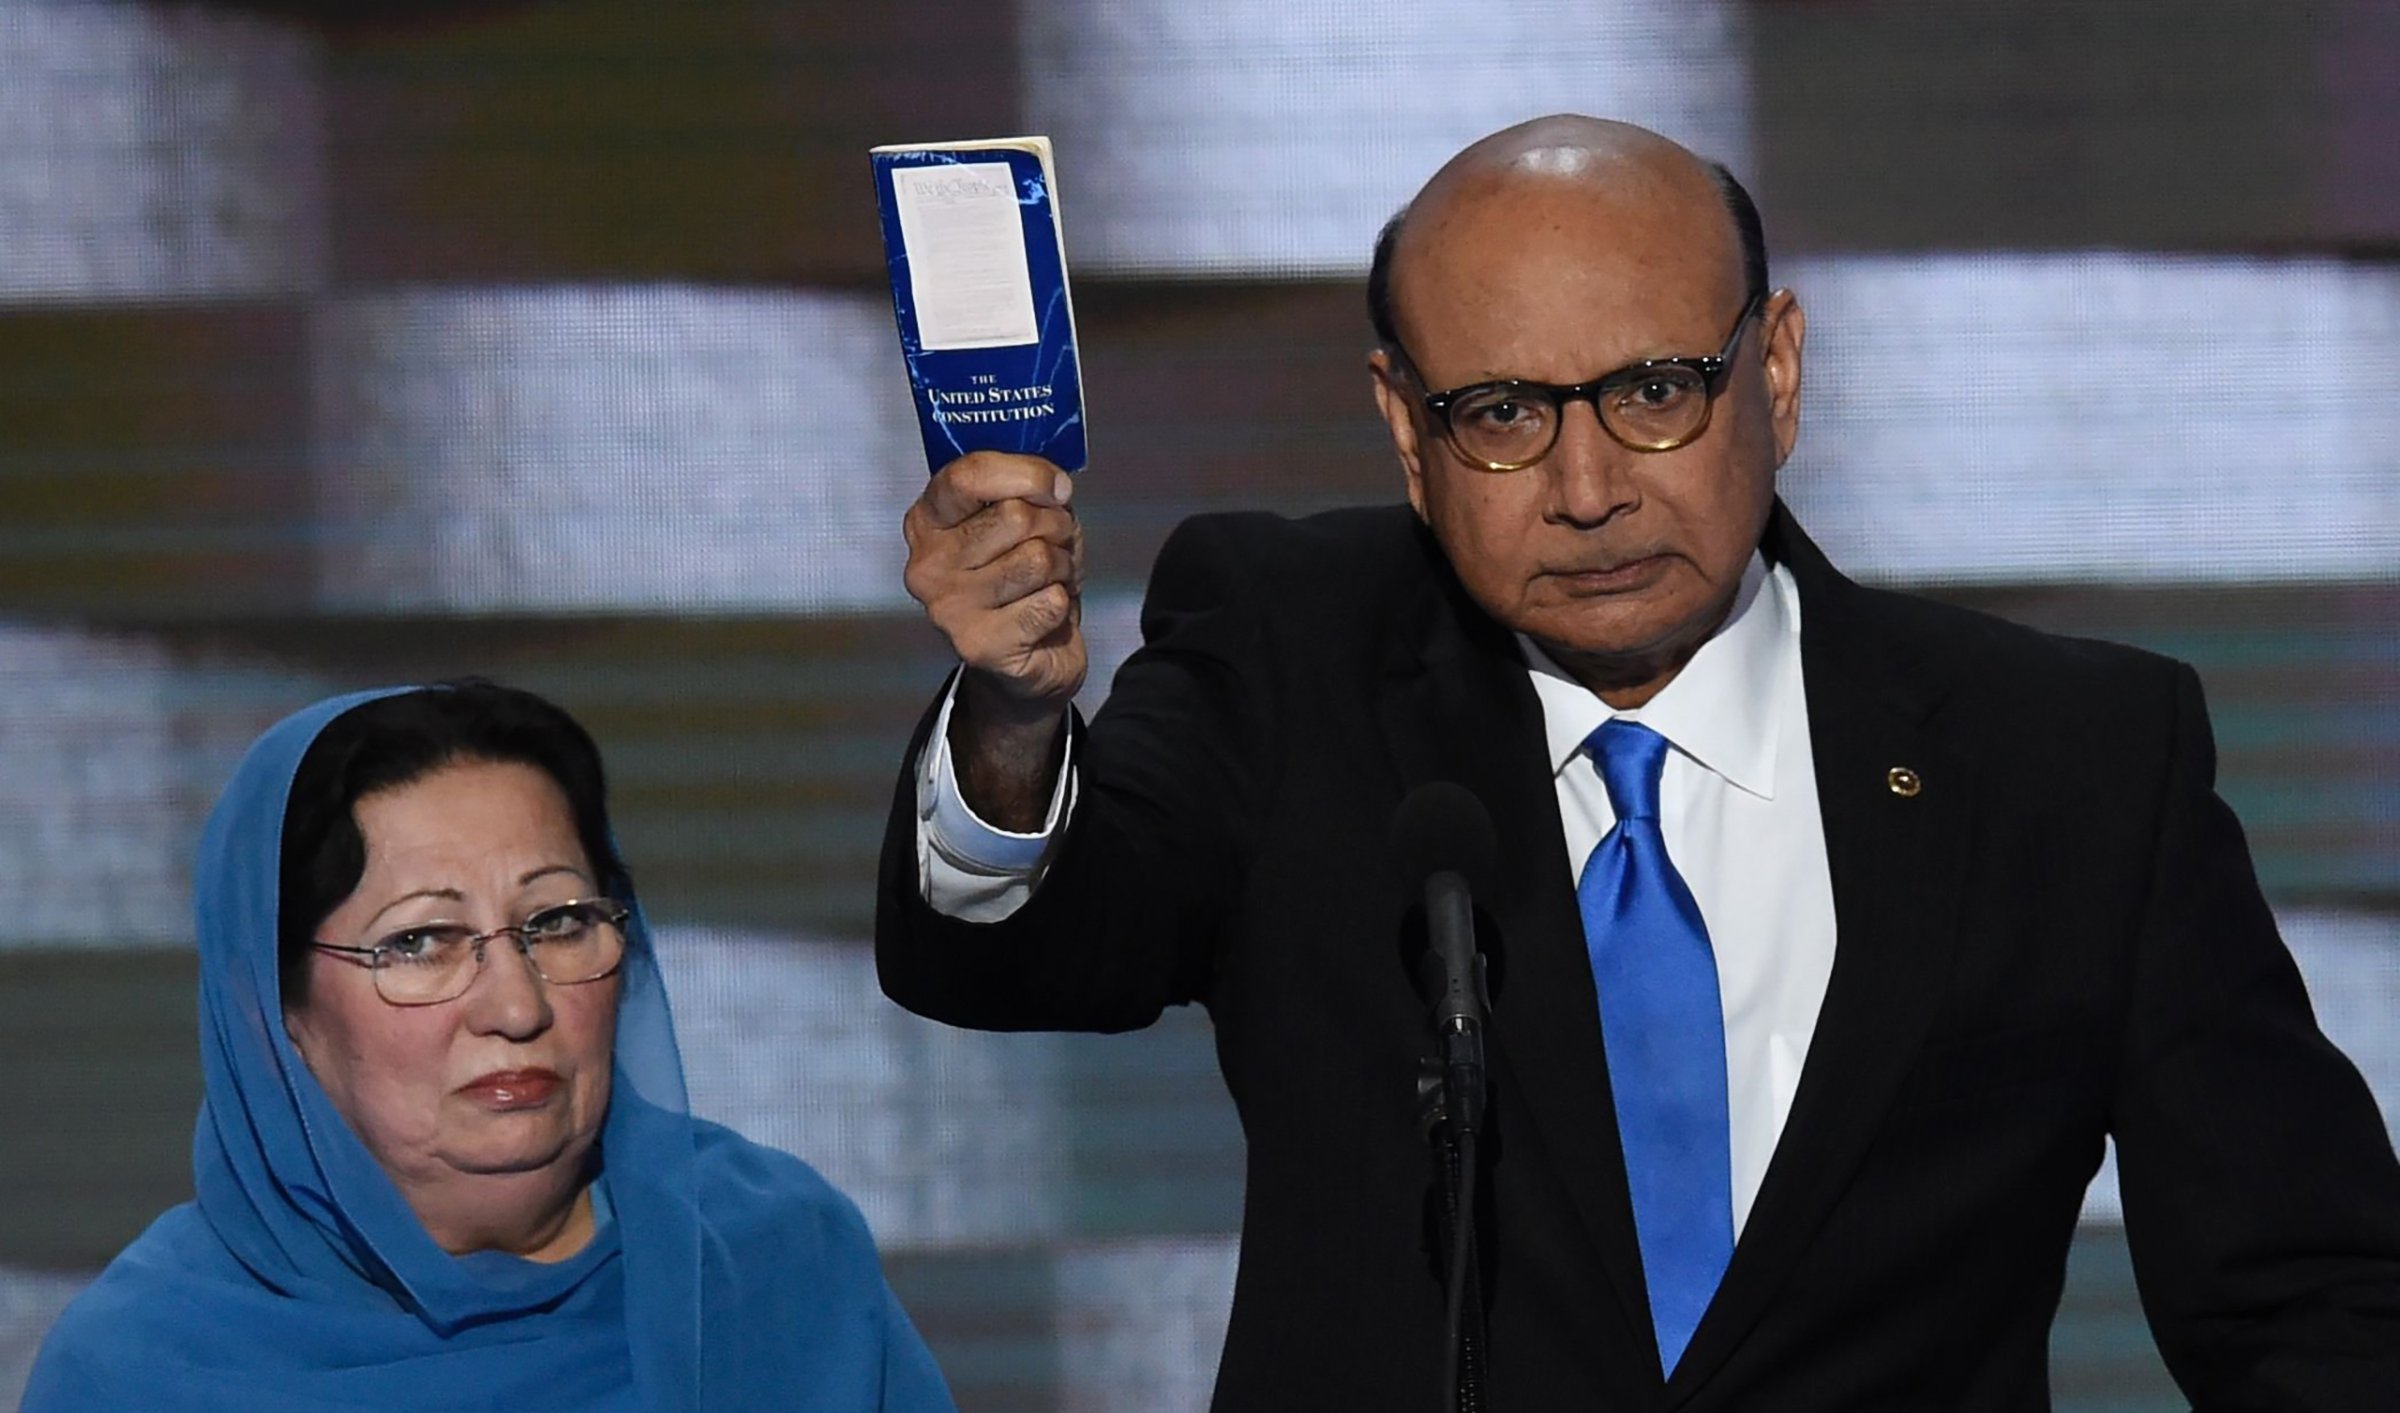 Khizr Khan holding his personal copy of the US Constitution while addressing delegates on the fourth and final day of the Democratic National Convention at Wells Fargo Center in Philadelphia, Pennsylvania, July 28, 2016.